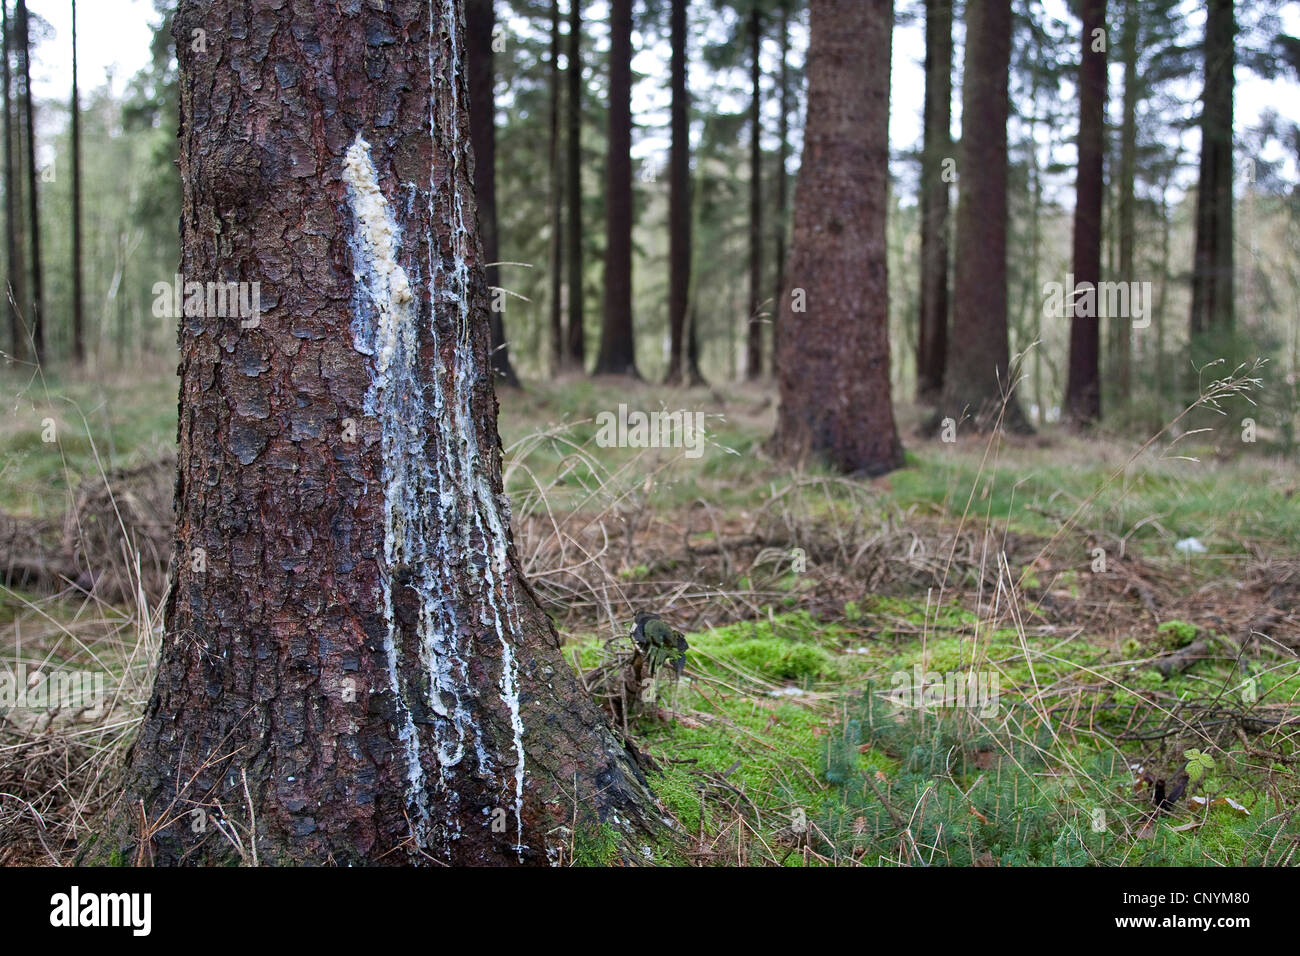 Norway spruce (Picea abies), tree gum running out of a hurt spruce trunk Stock Photo